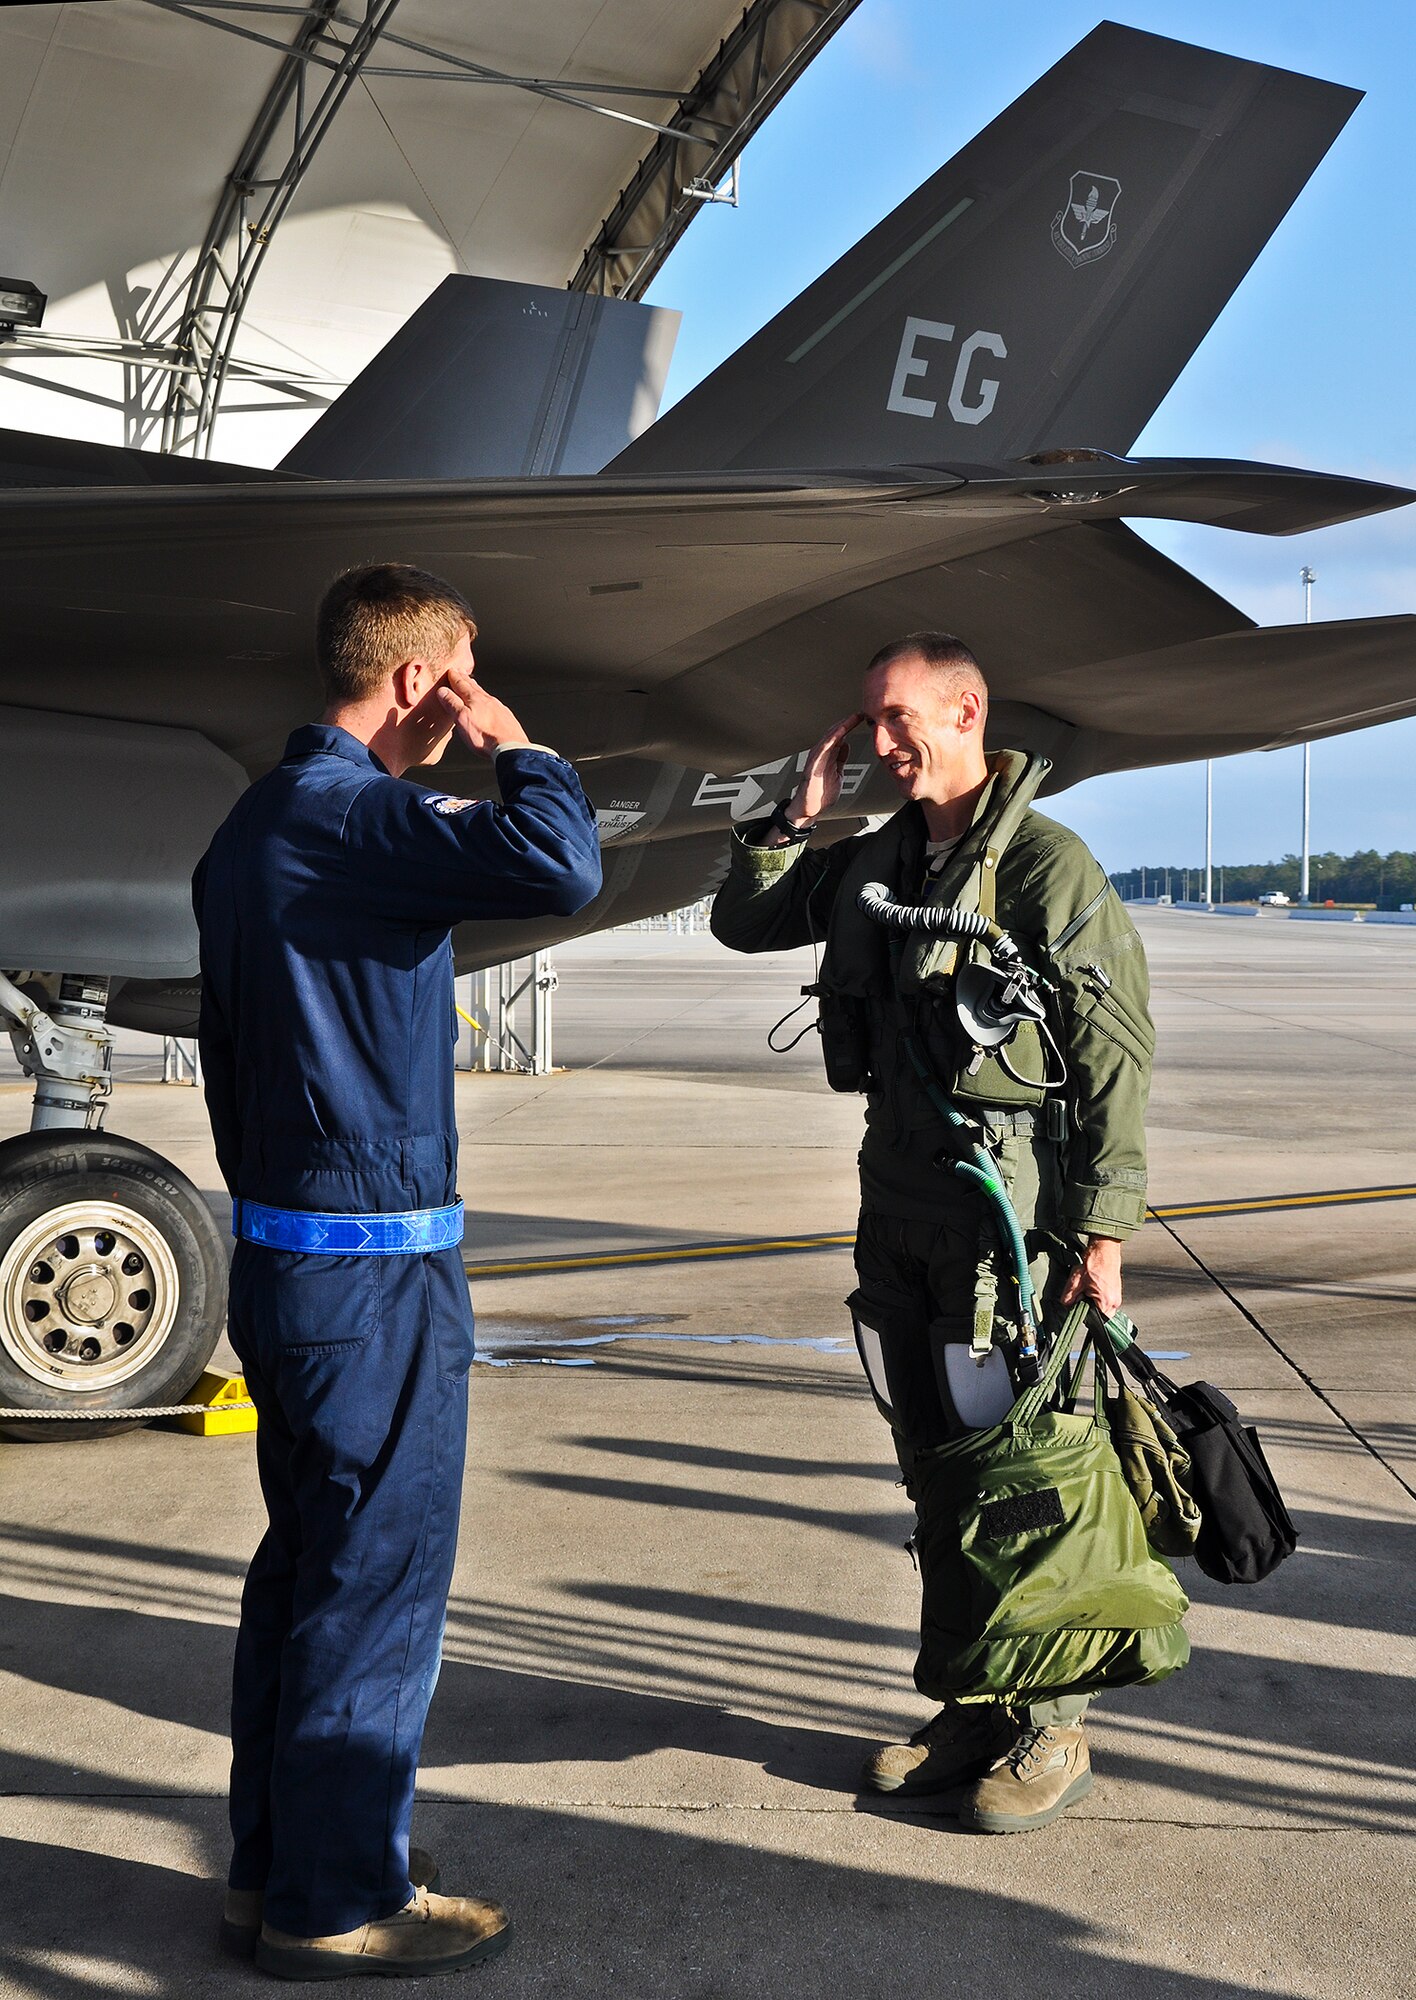 Lt. Col. Brian O'Neill, 31st Test and Evaluation Squadron director of operations and a "student" in the Air Force F-35A Lightning II Operational Utility Evaluation, salutes his crew chief before his postflight inspection Nov. 14 at Eglin Air Force Base, Fla.  He became qualified to fly the aircraft during the last sortie of the service’s evaluation of the 33rd Fighter Wing's joint strike fighter training program, a necessary review for Air Education and Training Command to decide if the unit is “ready for training” next year.  O’Neill will return to the 31st TES, a geographically separated unit of the 53rd Wing at Edwards AFB, Calif., where the Air Force will eventually begin operational testing on the new aircraft. (U.S. Air Force photo/Maj. Karen Roganov)